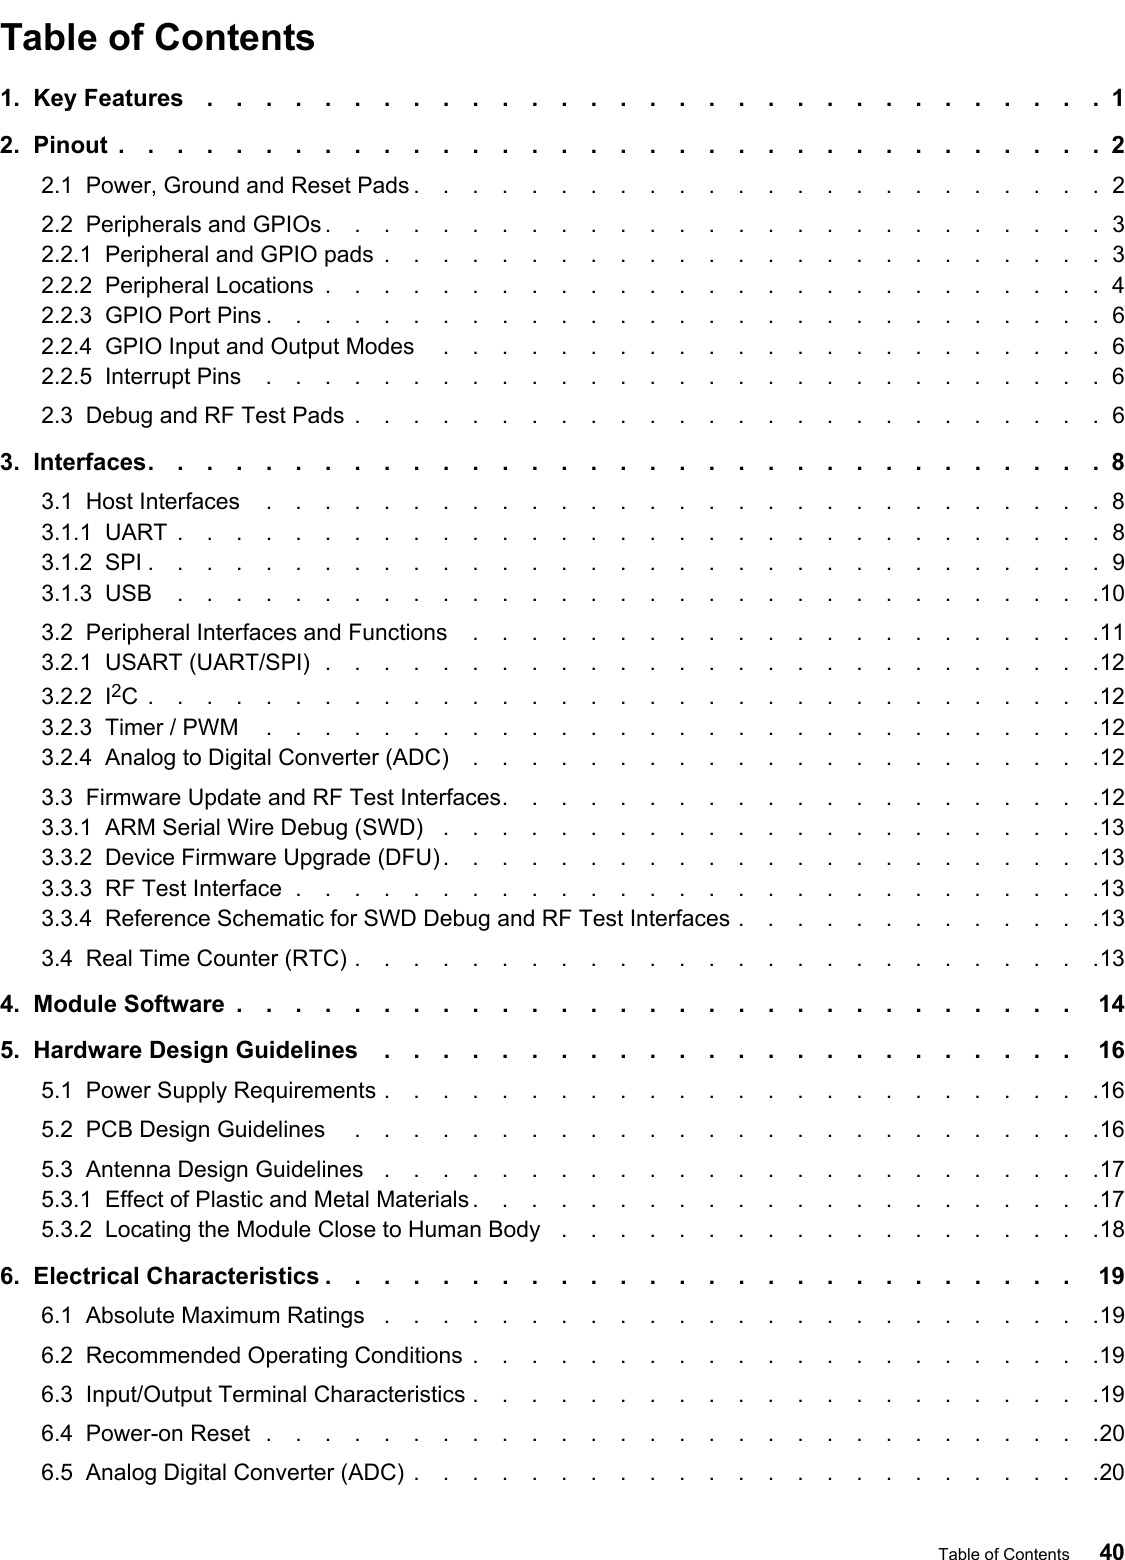 Table of Contents1.  Key Features ...............................12.  Pinout ..................................22.1  Power, Ground and Reset Pads ........................22.2  Peripherals and GPIOs ...........................32.2.1  Peripheral and GPIO pads .........................32.2.2  Peripheral Locations ...........................42.2.3  GPIO Port Pins .............................62.2.4  GPIO Input and Output Modes .......................62.2.5  Interrupt Pins .............................62.3  Debug and RF Test Pads ..........................63.  Interfaces.................................83.1  Host Interfaces .............................83.1.1  UART ................................83.1.2  SPI .................................93.1.3  USB ................................103.2  Peripheral Interfaces and Functions ......................113.2.1  USART (UART/SPI) ...........................123.2.2  I2C.................................123.2.3  Timer / PWM .............................123.2.4  Analog to Digital Converter (ADC) ......................123.3  Firmware Update and RF Test Interfaces.....................123.3.1  ARM Serial Wire Debug (SWD) .......................133.3.2  Device Firmware Upgrade (DFU) .......................133.3.3  RF Test Interface ............................133.3.4  Reference Schematic for SWD Debug and RF Test Interfaces .............133.4  Real Time Counter (RTC) ..........................134.  Module Software ............................. 145.  Hardware Design Guidelines ........................ 165.1  Power Supply Requirements .........................165.2  PCB Design Guidelines ..........................165.3  Antenna Design Guidelines .........................175.3.1  Effect of Plastic and Metal Materials ......................175.3.2  Locating the Module Close to Human Body  ...................186.  Electrical Characteristics .......................... 196.1  Absolute Maximum Ratings .........................196.2  Recommended Operating Conditions ......................196.3  Input/Output Terminal Characteristics ......................196.4  Power-on Reset .............................206.5  Analog Digital Converter (ADC) ........................20Table of Contents 40